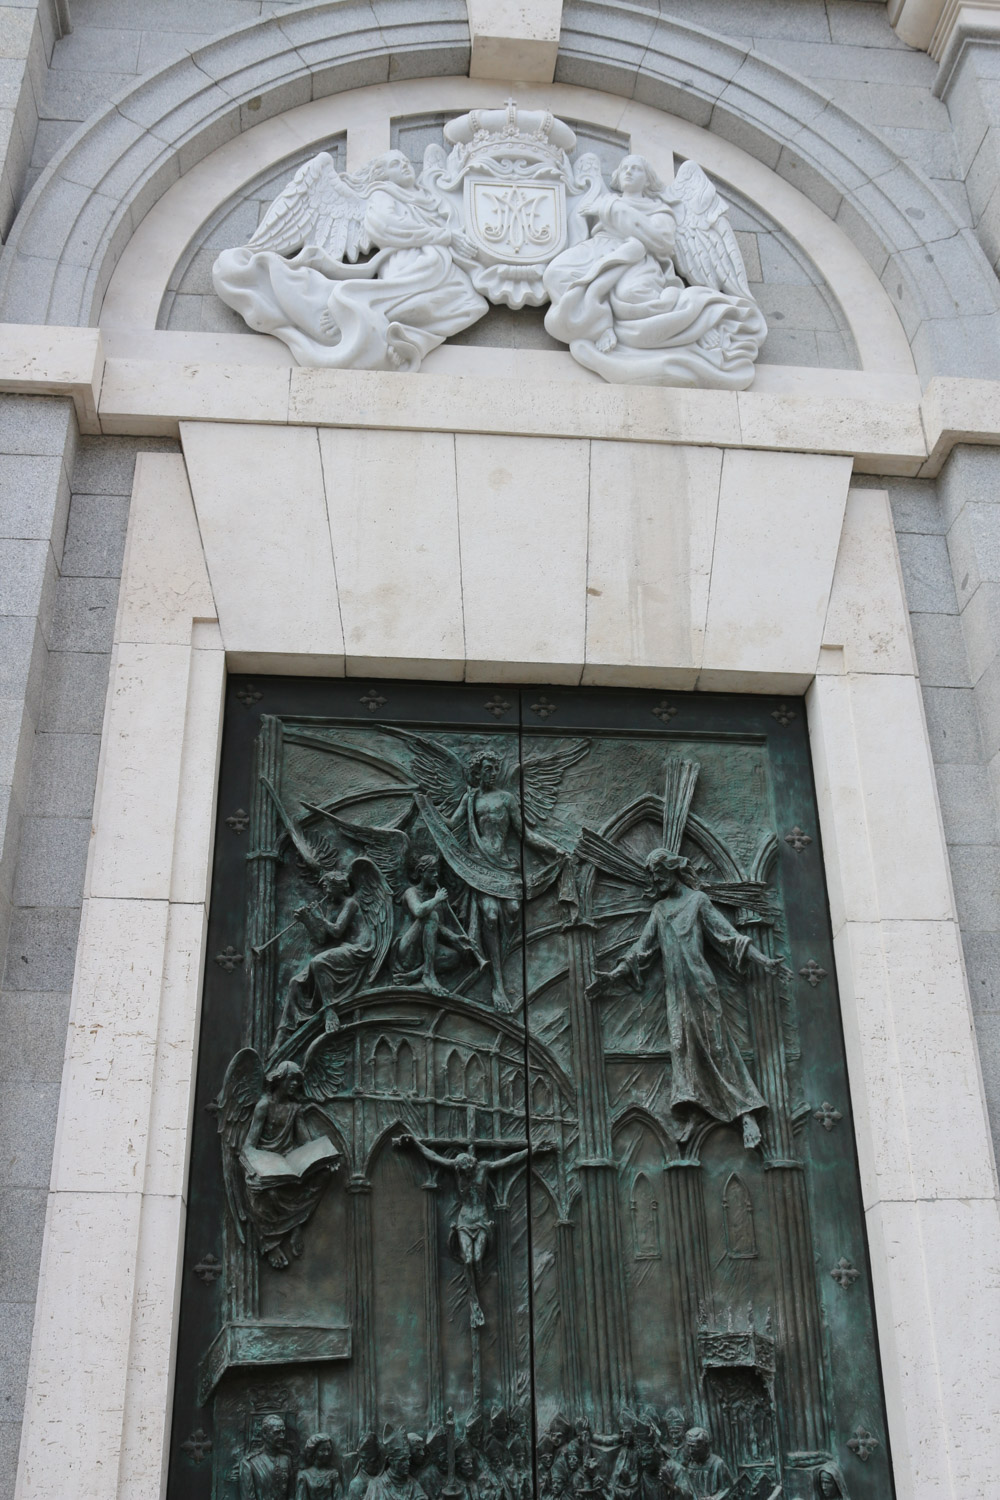 Bronze entrance gate of the Almudena Cathedral